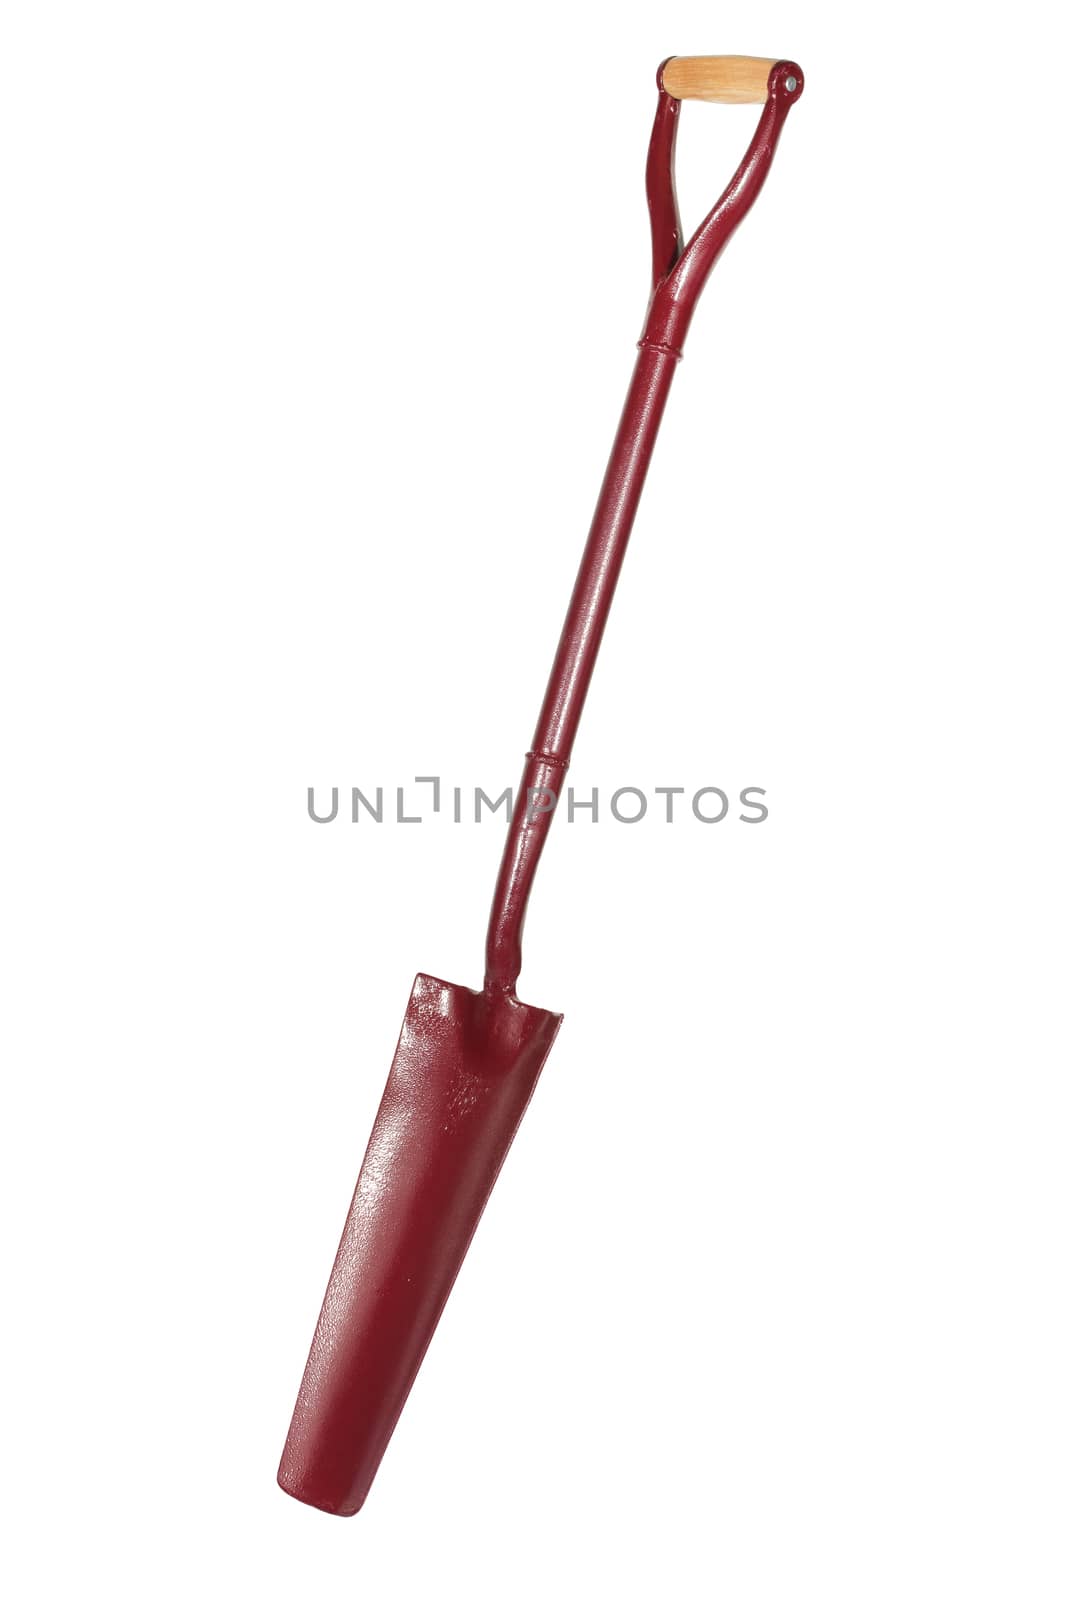 A Red Steel Draining Myd shovel inclined on white background with clipping path